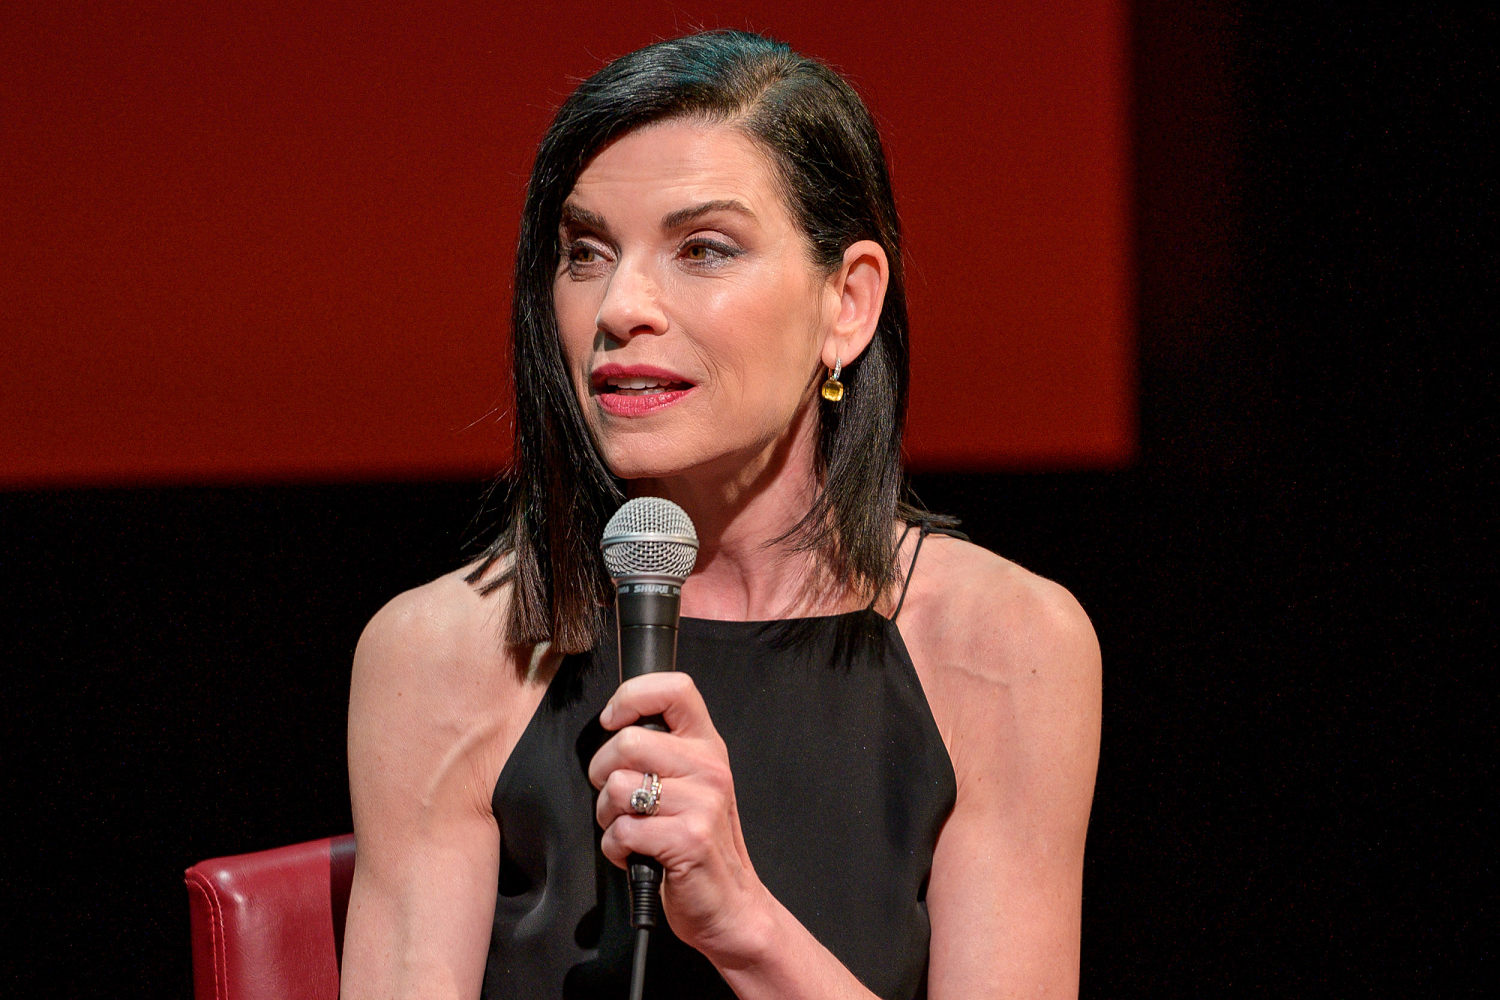 julianna margulies apologizes for saying black people have been ‘brainwashed to hate jews’